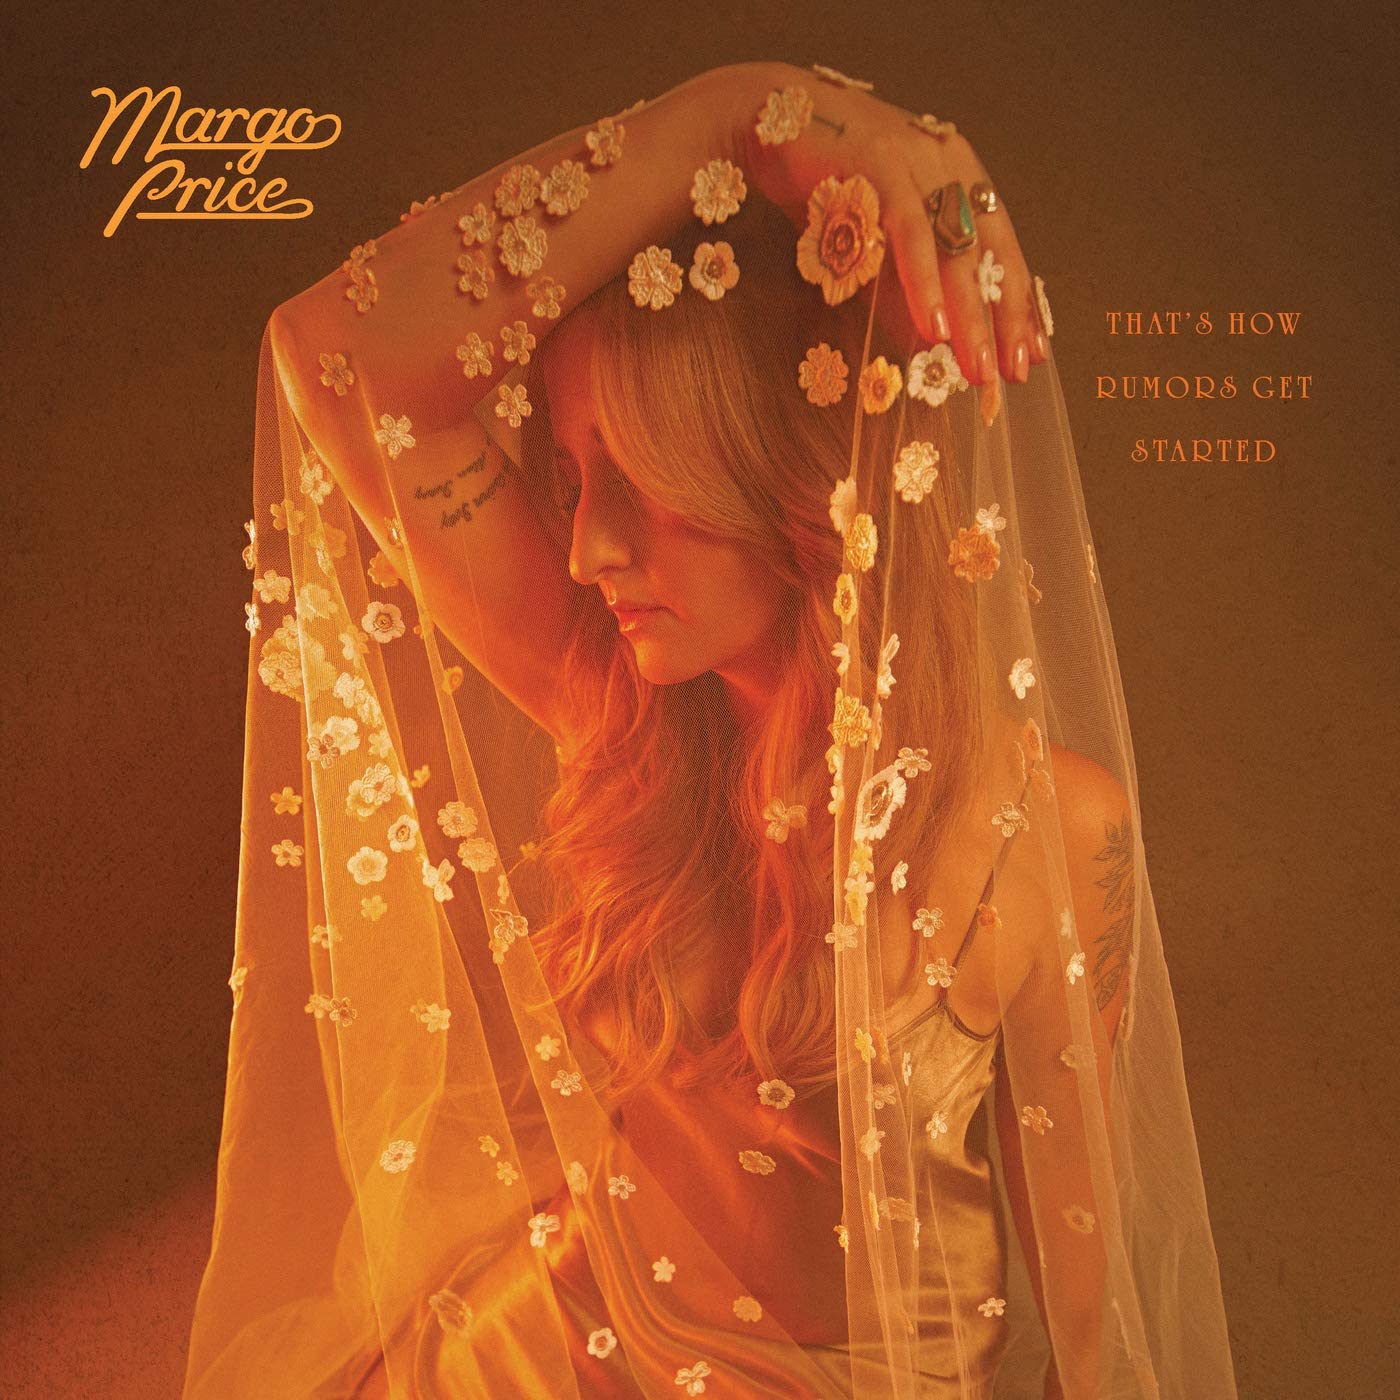 Margo Price - That's How Rumours Get Started - LP